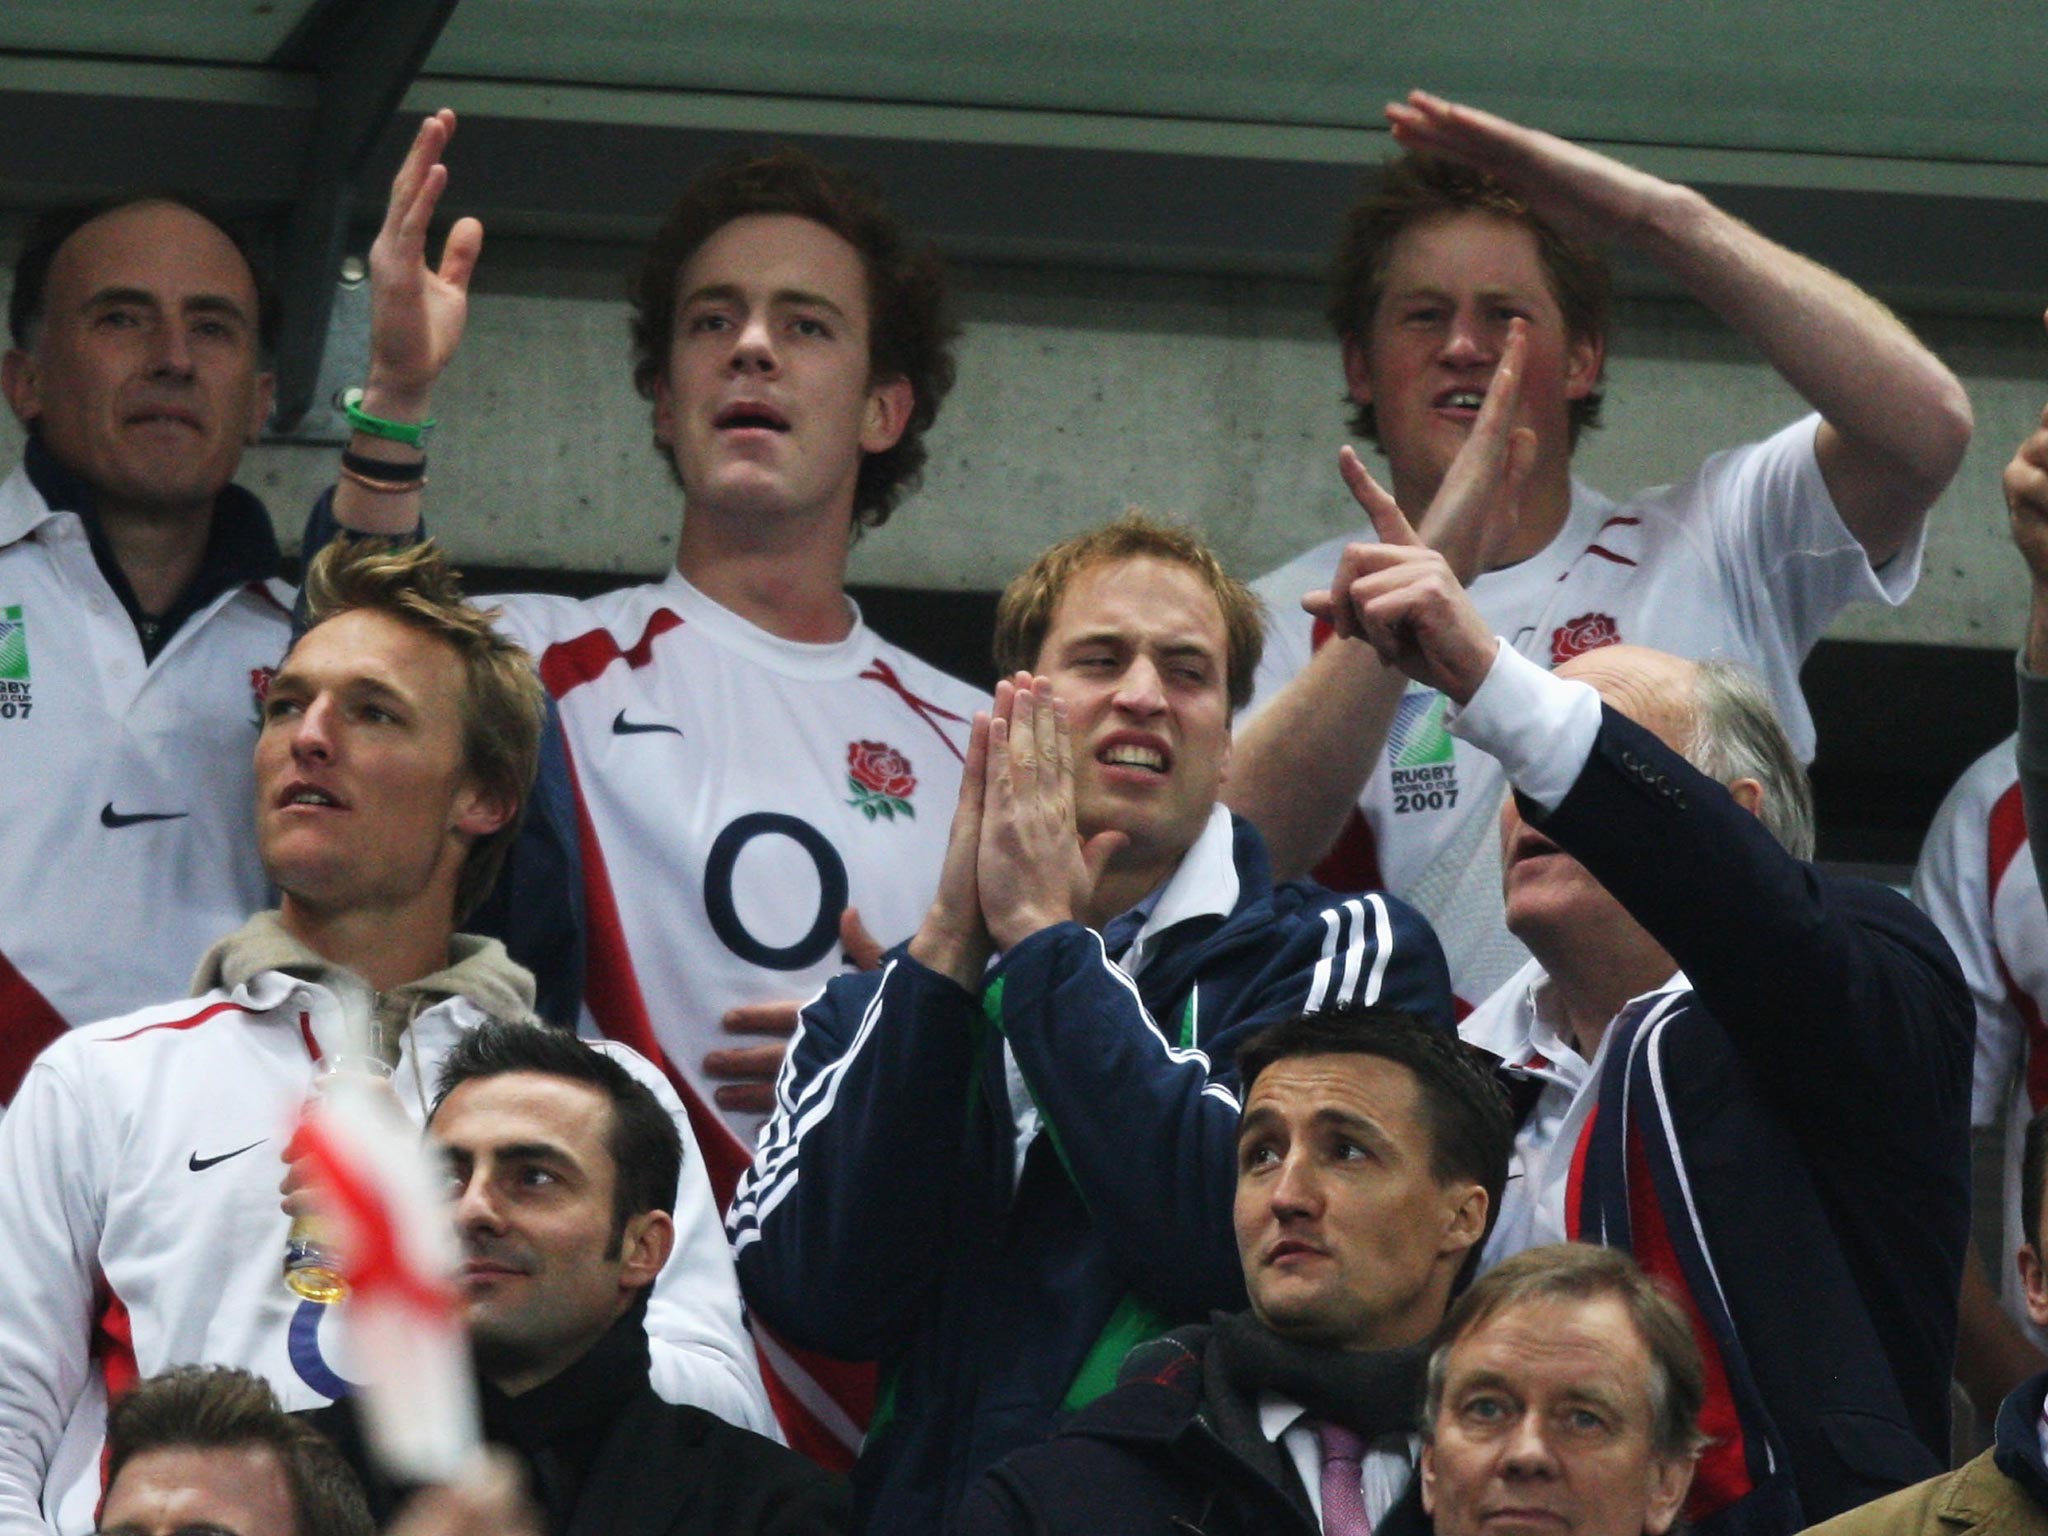 Princes William and Harry get into the swing at Twickenham